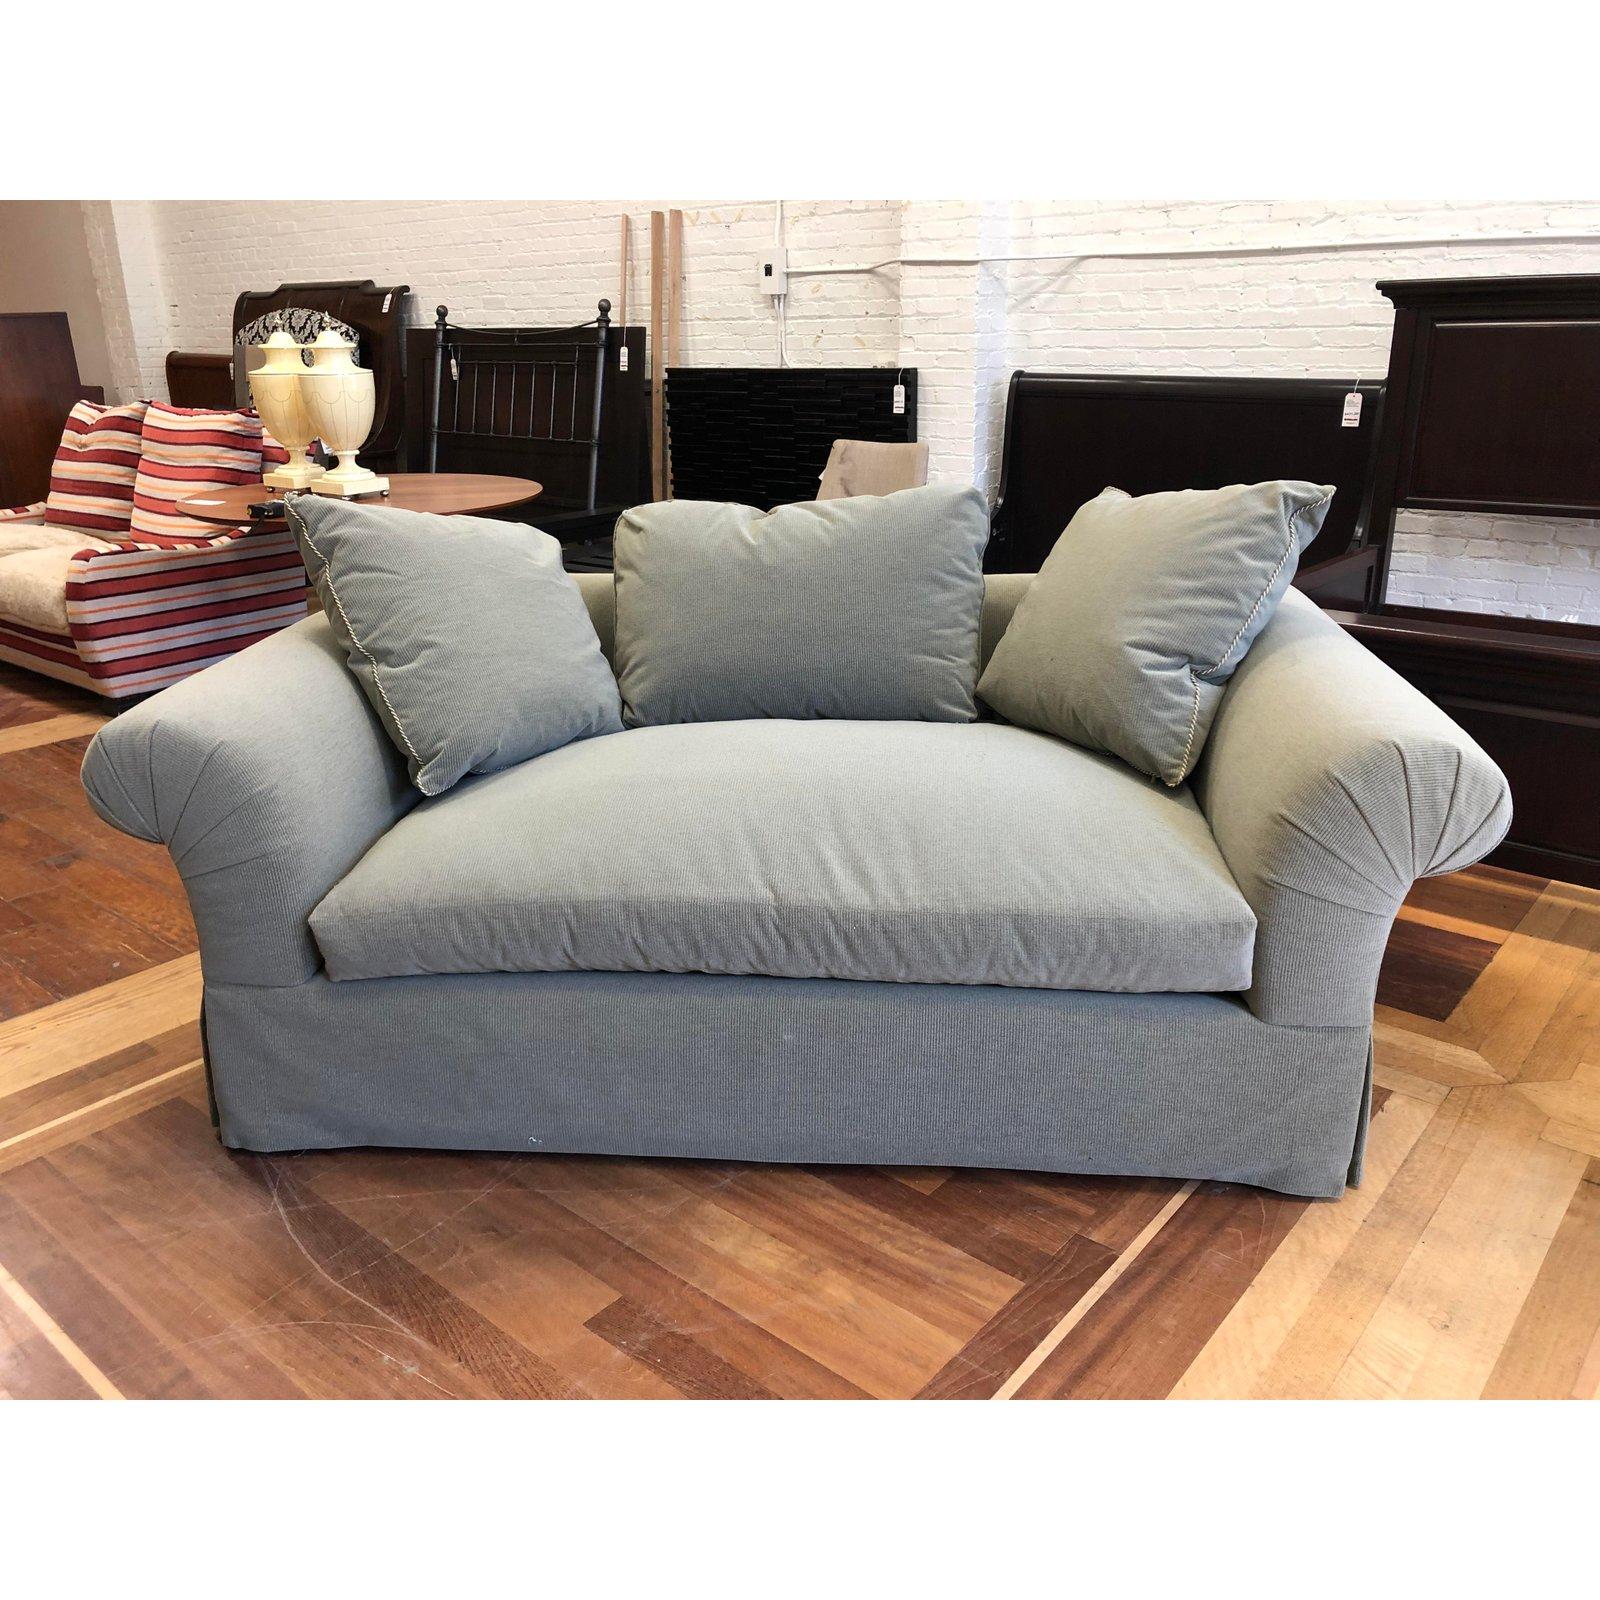 A custom lounge sofa by A. Rudin. A rolled arm deep luxe depth for comfort. Upholstered in Rogers & Goffigon- Hash Stone Dust fabric. The trimming of the pillows are a Samuel & Sons Warwick Twist for with tape. A single seat cushion accompanied with